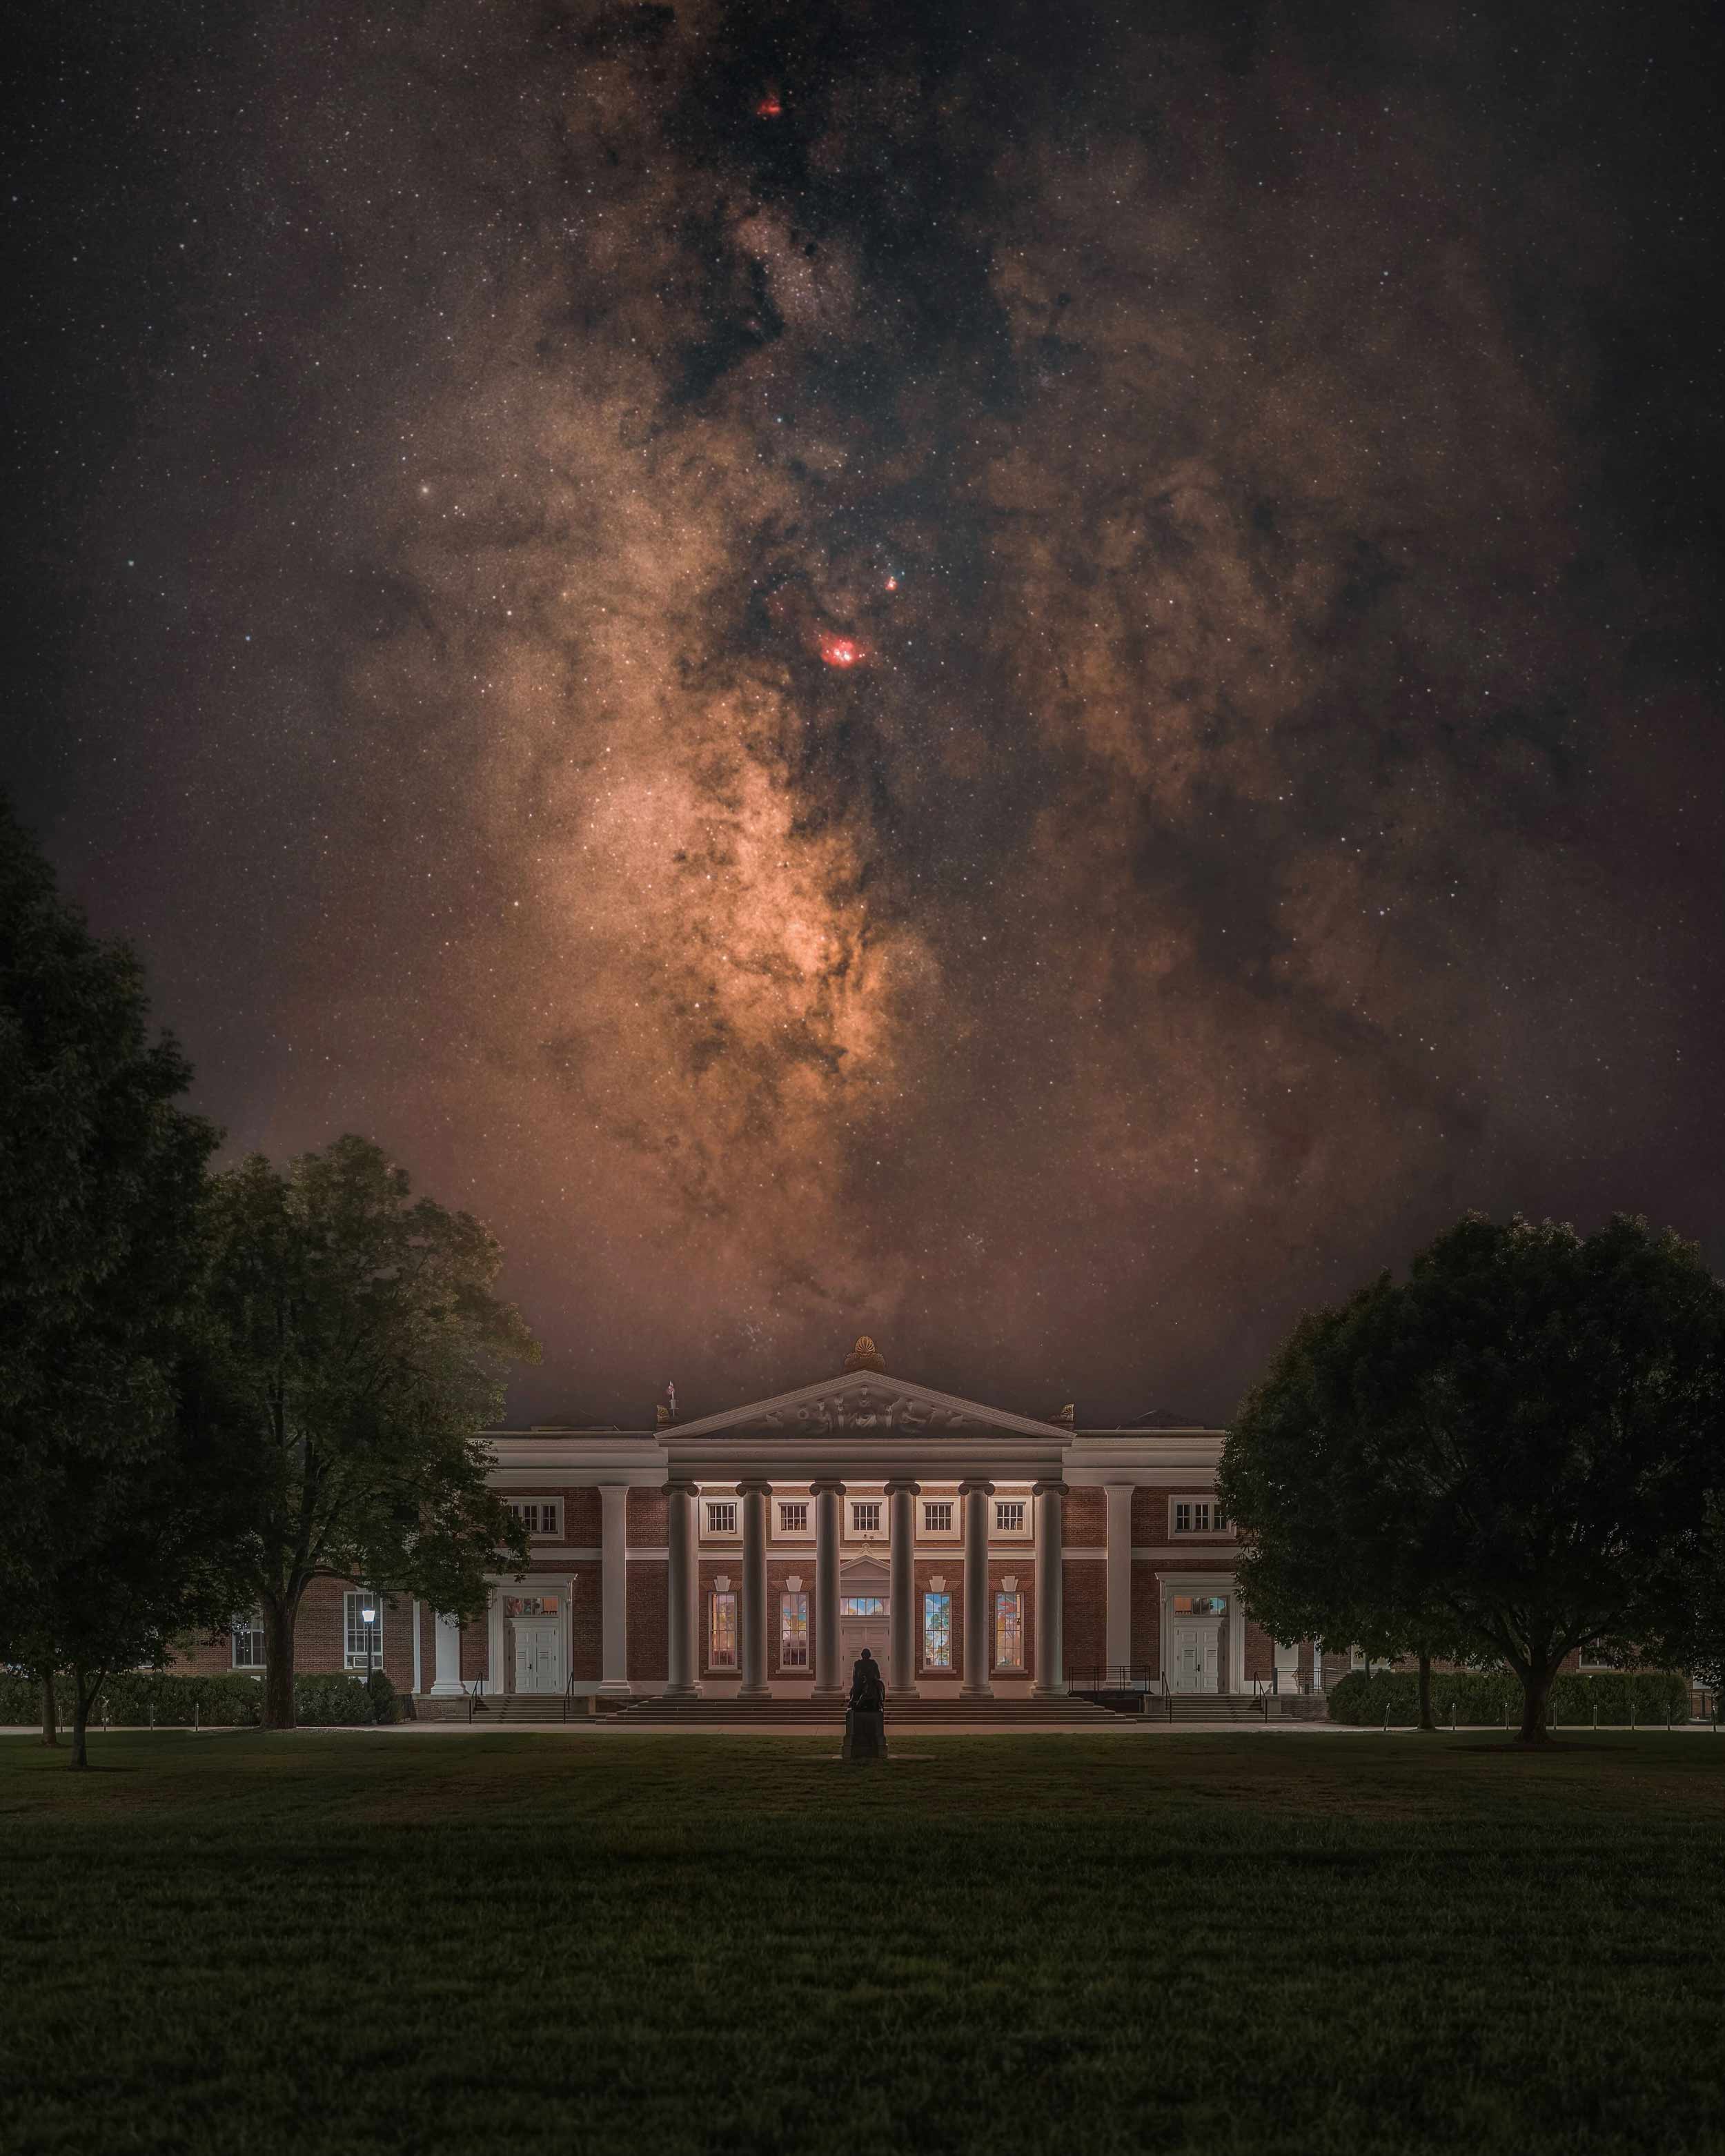 The dark and light gaseous clouds of the Milky Way Galaxy are prominent in the night sky over Old Cabell Hall